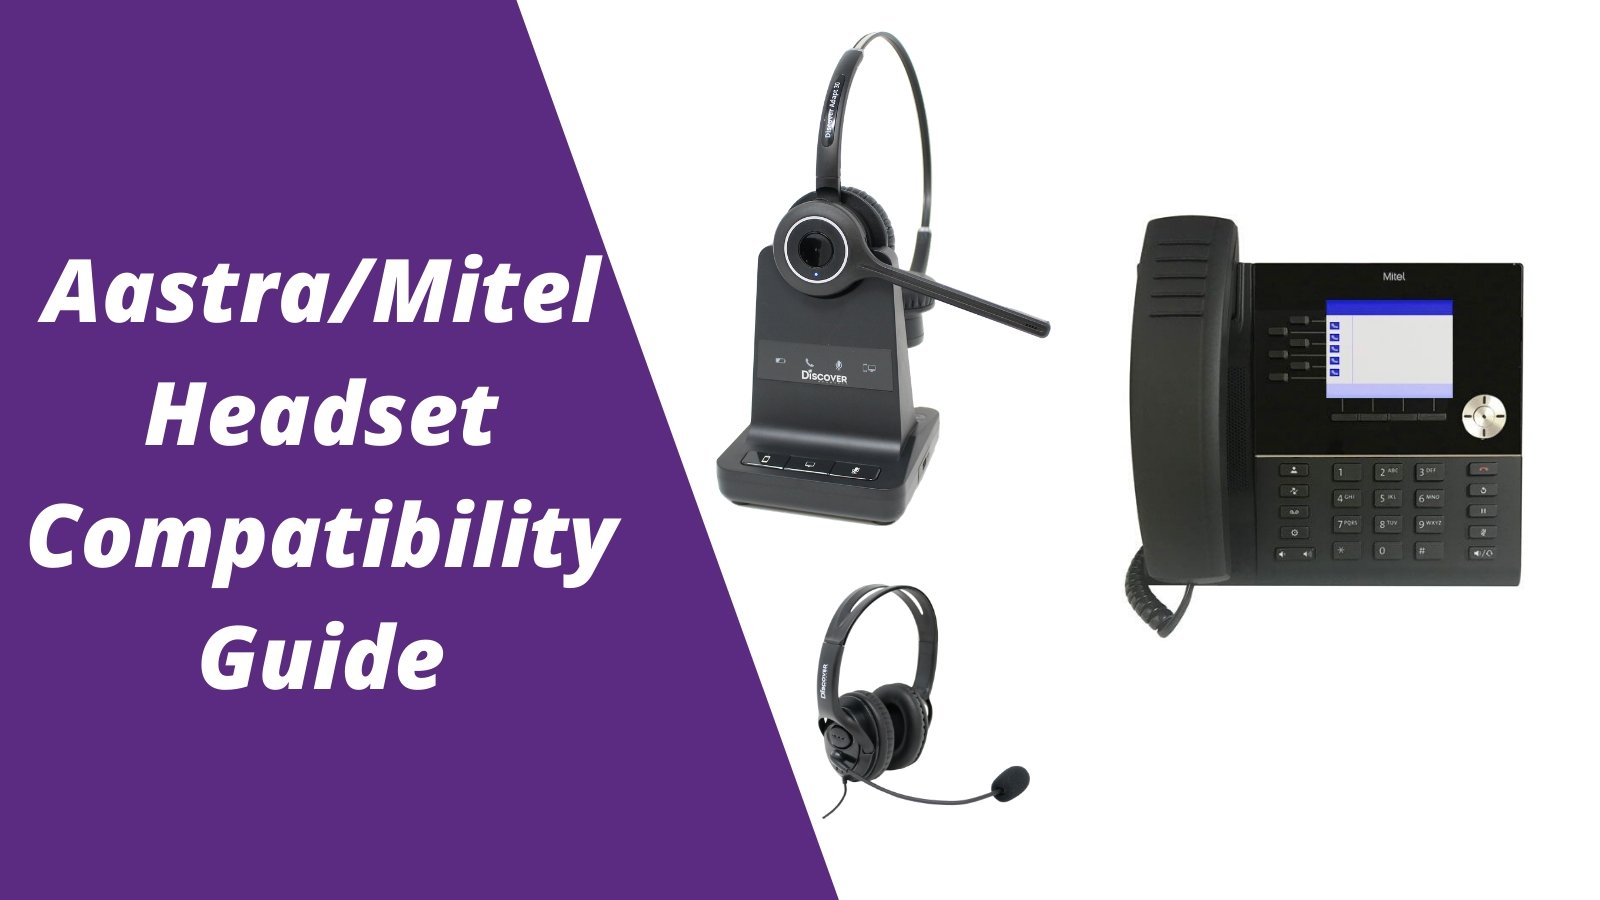 Aastra/Mitel Headset Compatibility Guide: Everything You Need To Know - Headset Advisor